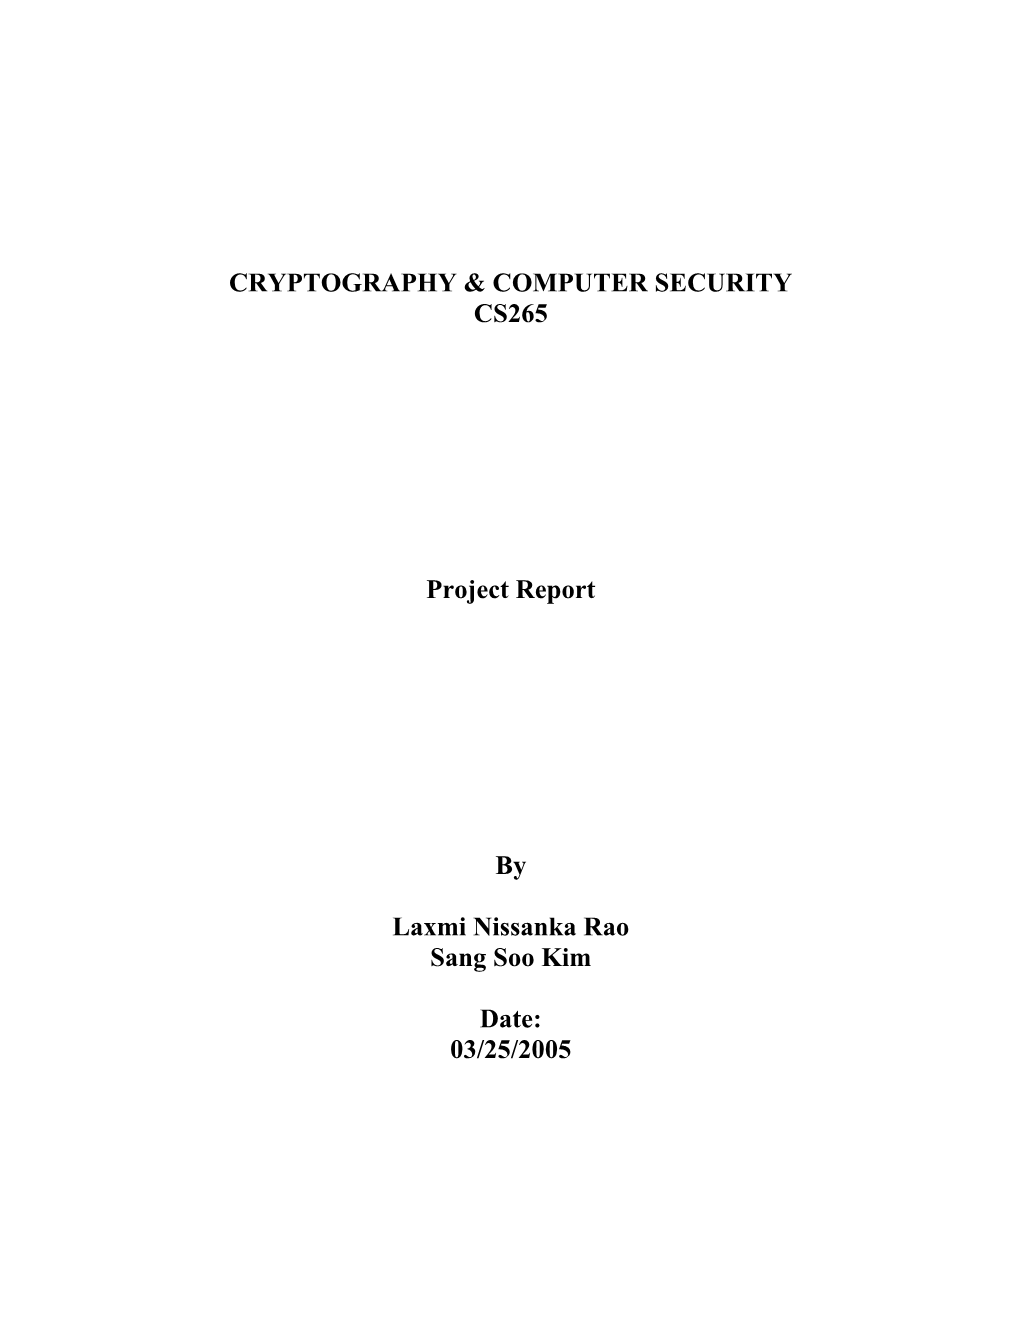 Cryptography & Computer Security